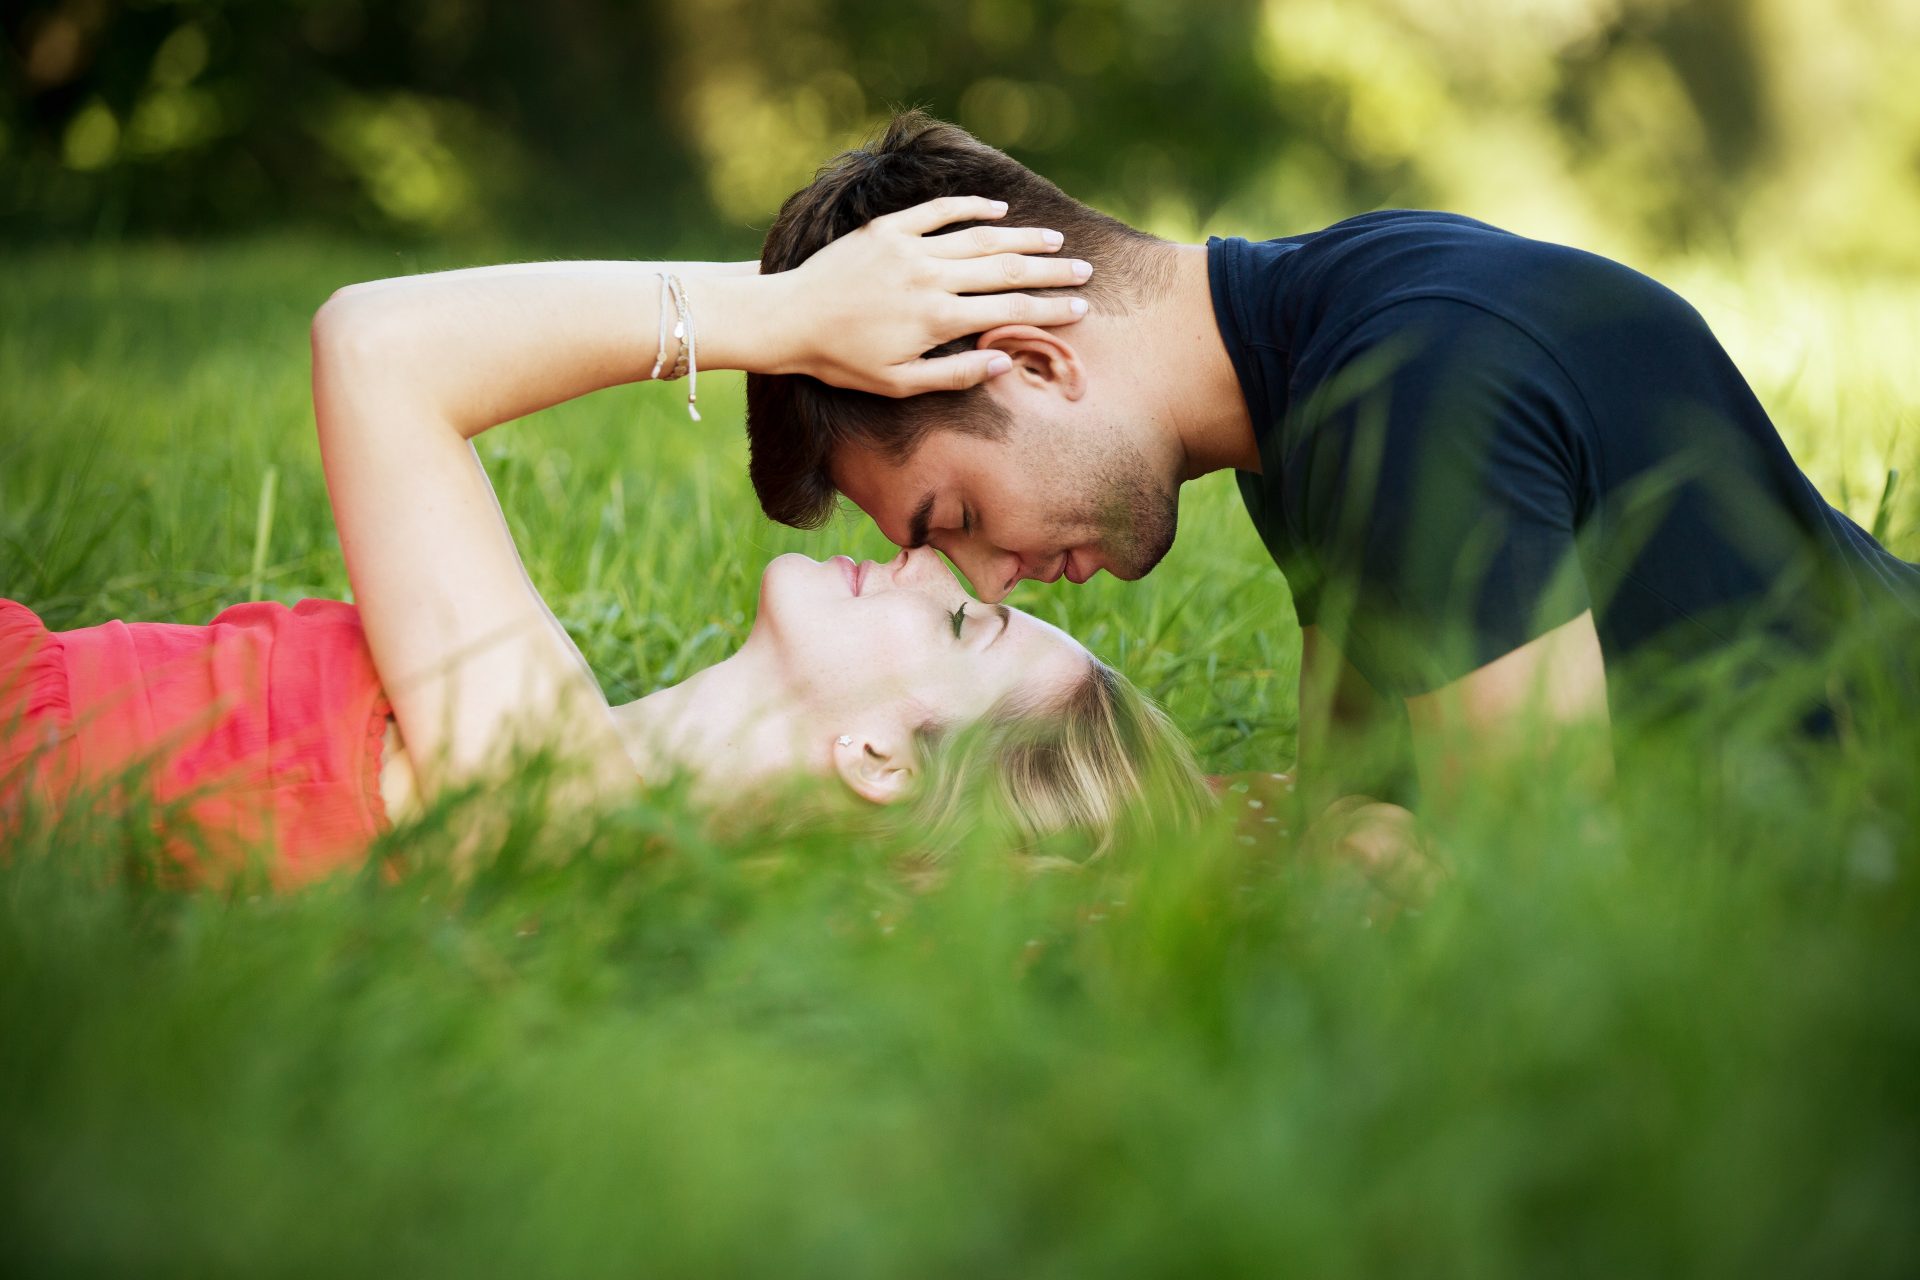 Taurus Man Pisces Woman Love at First Sight: How to Tell for Sure?